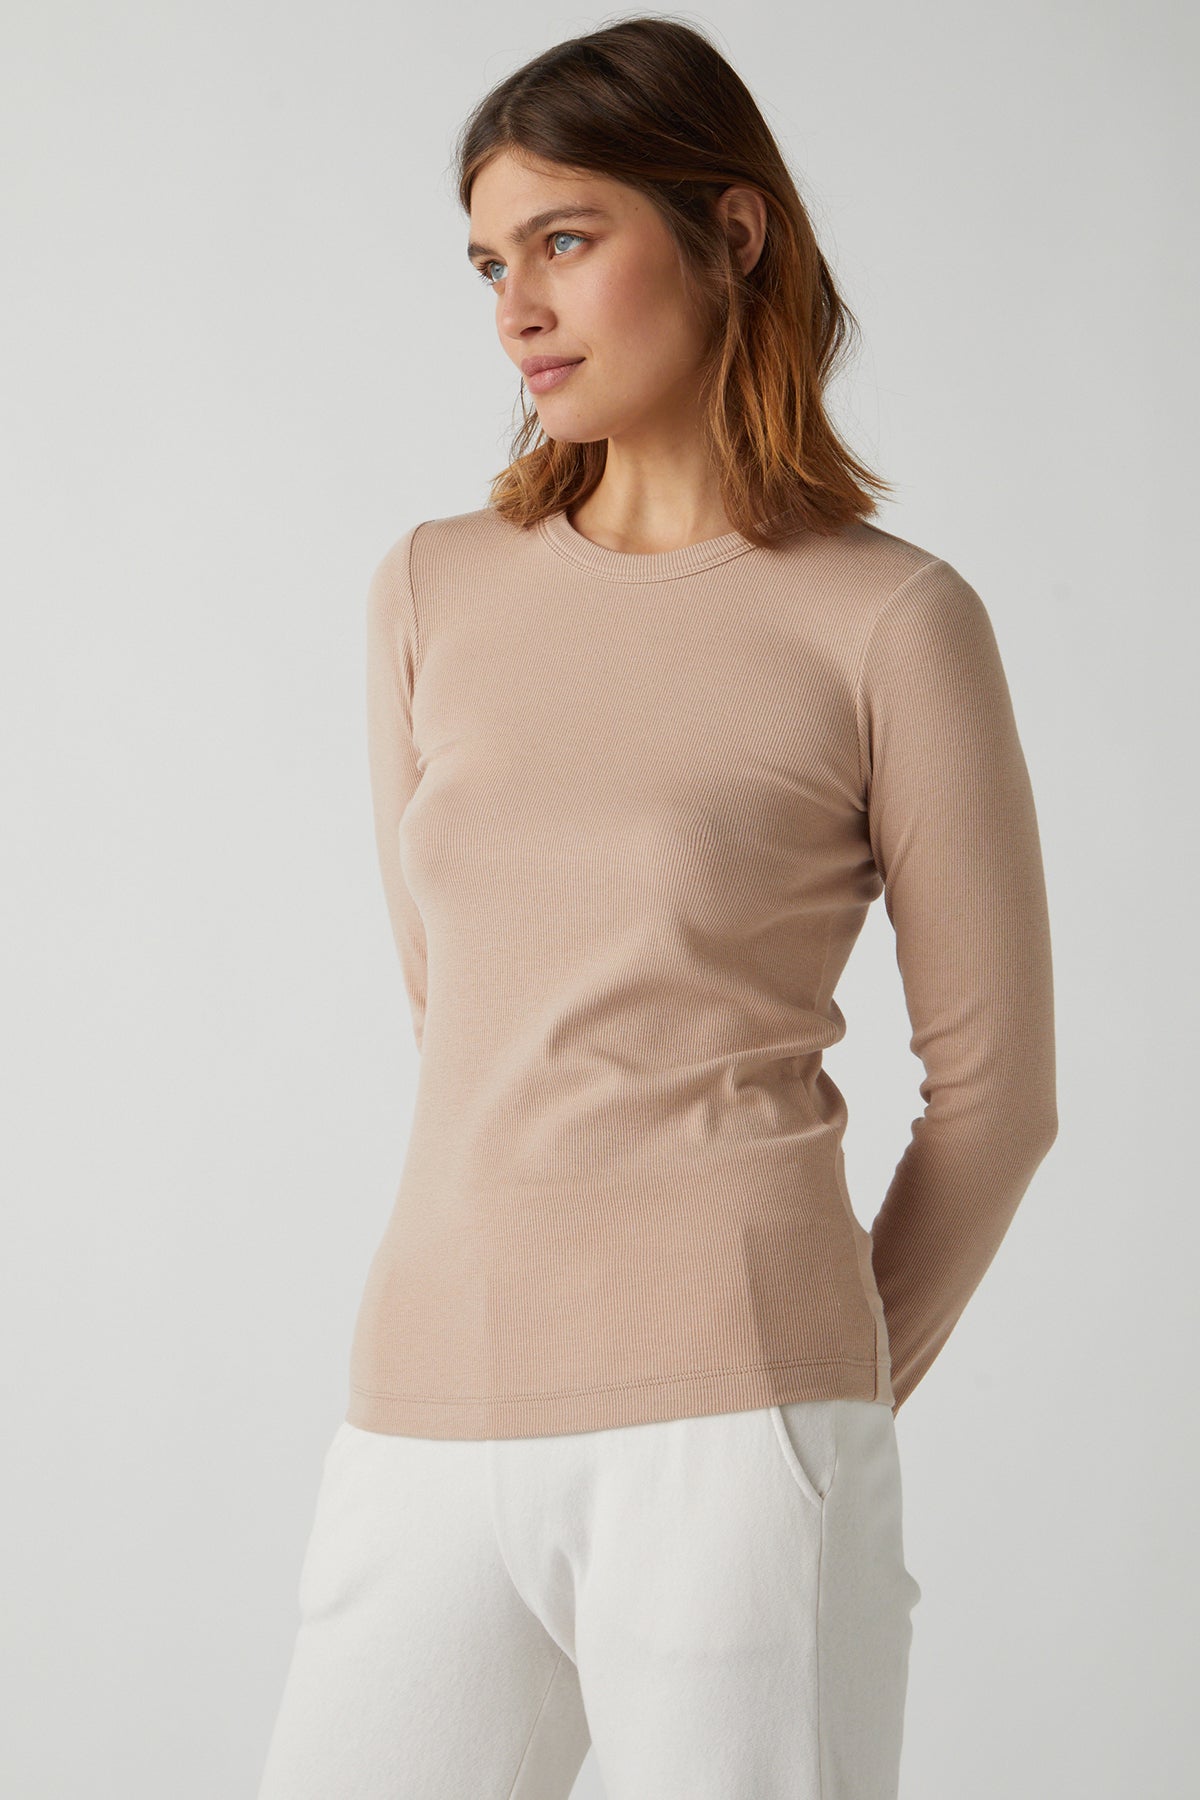 Long Sleeve Camino Tee in nude front & side-26458425131201